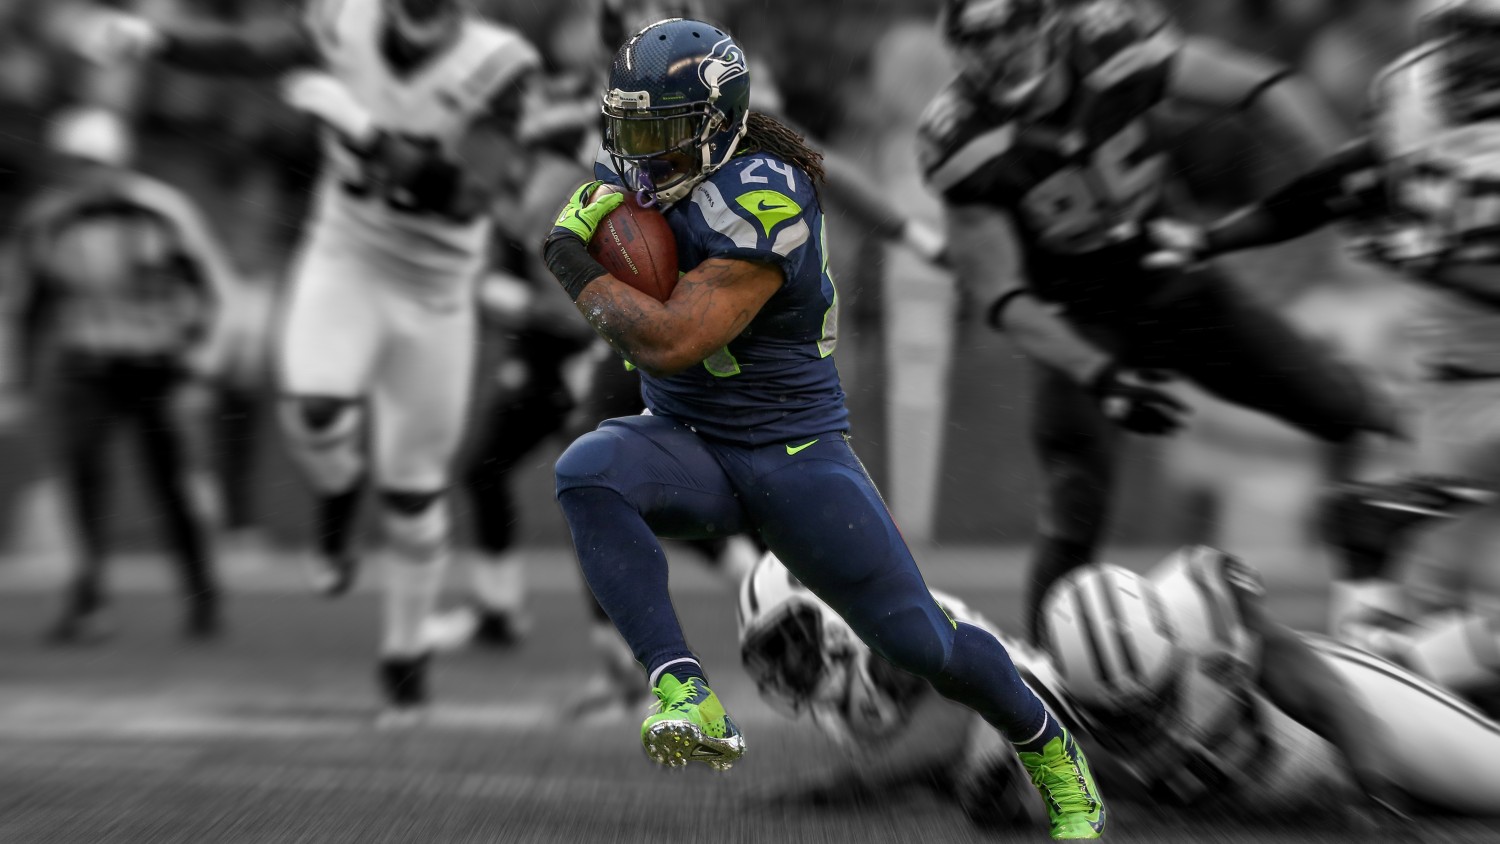 Awesome Seattle Seahawks Wallpaper High Defini 12419 Wallpaper Cool